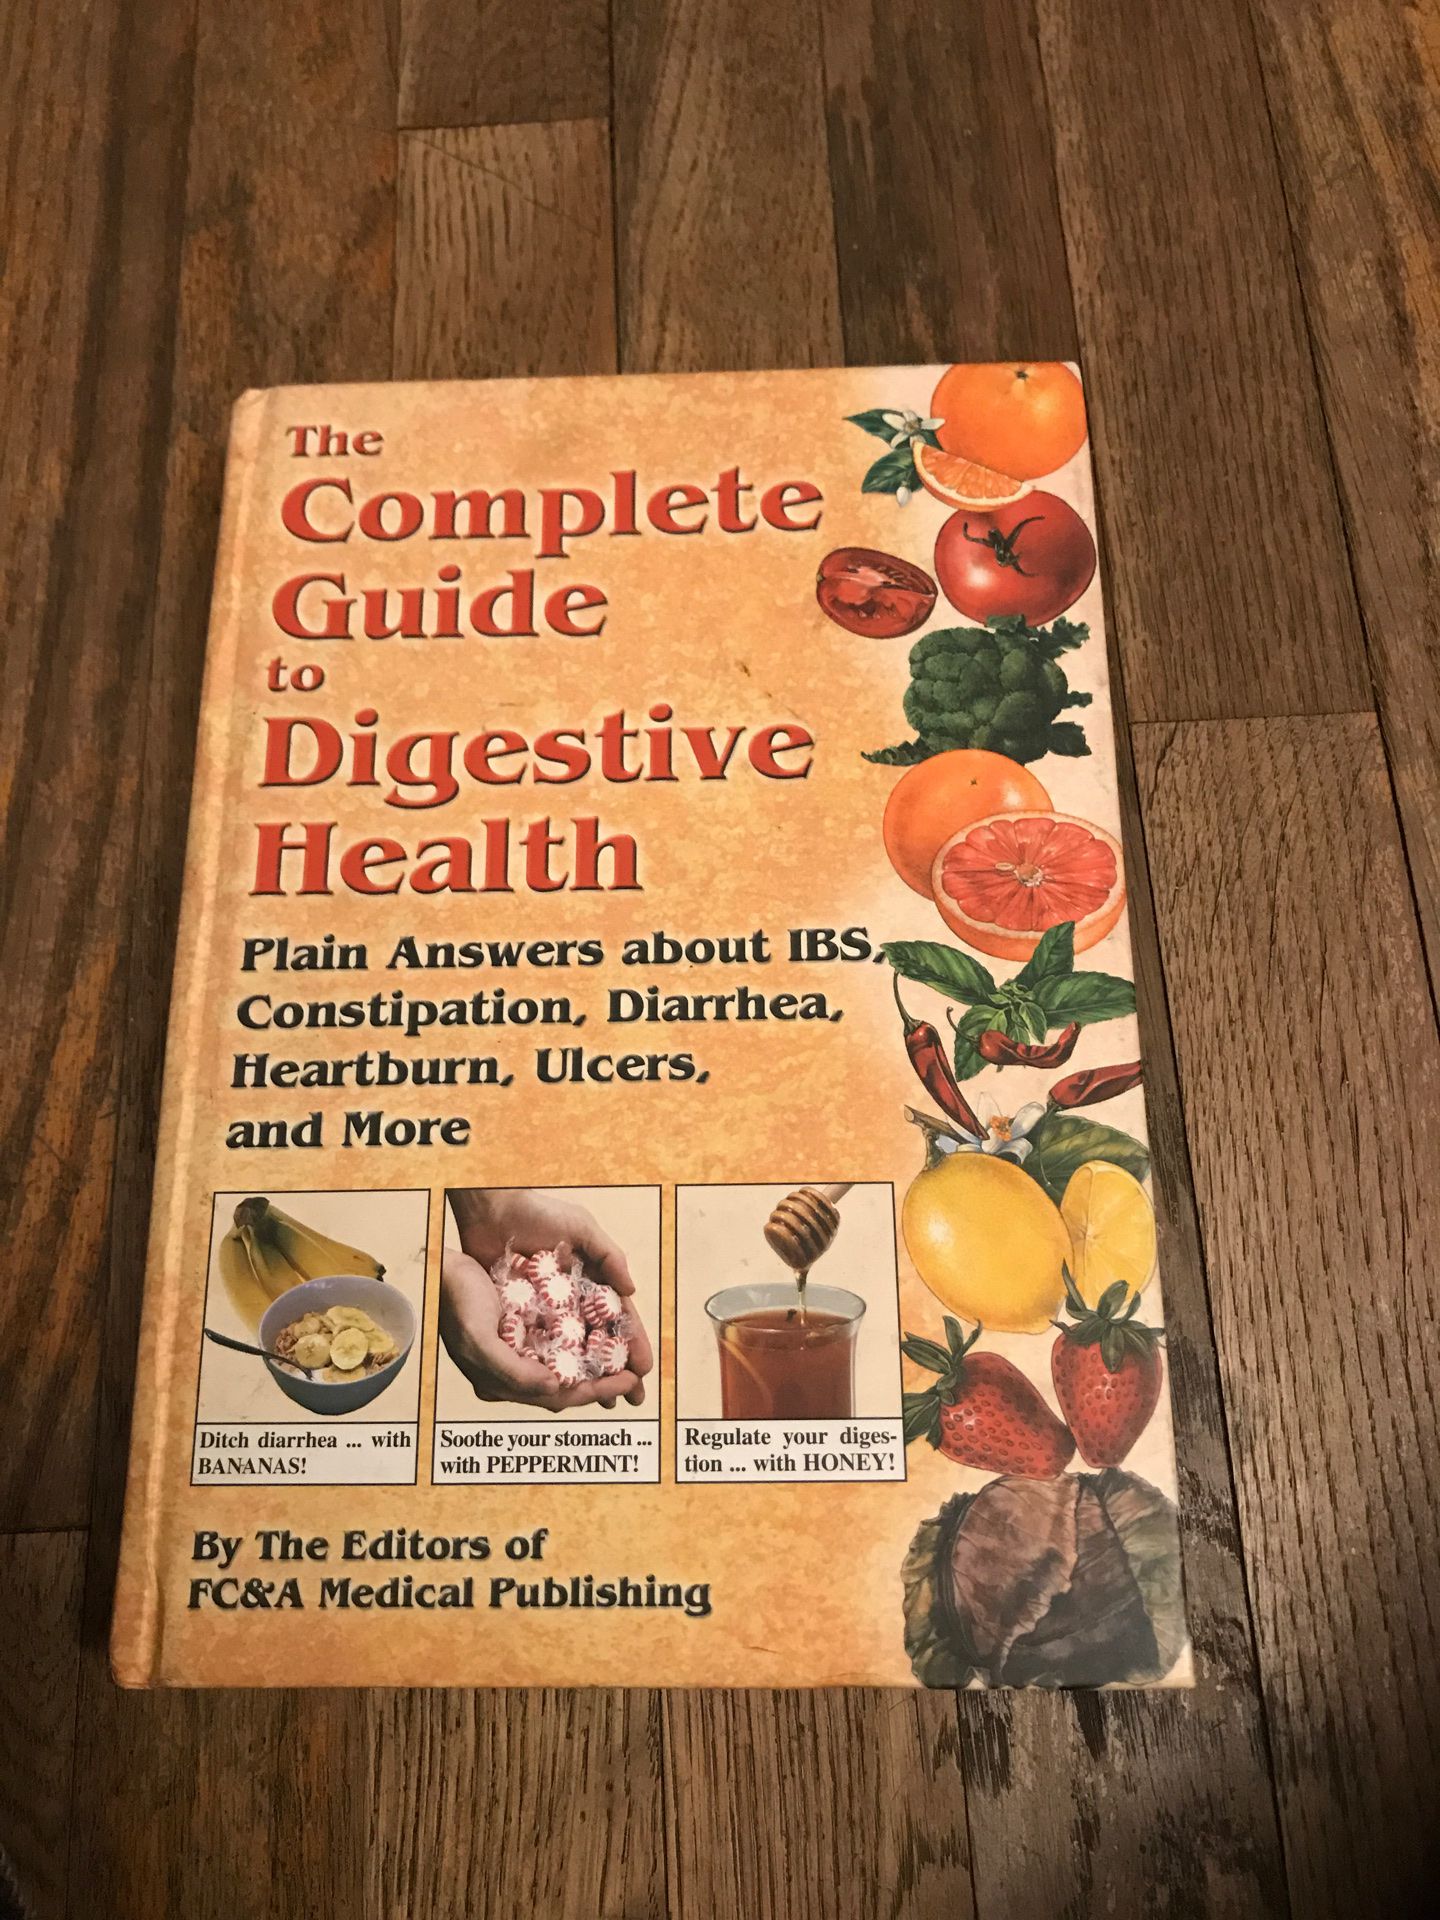 Complete Guide To Digestive Health: Plain Answers About Ibs, Constipation, Diarrhea, Heartburn, Ulcers, and More